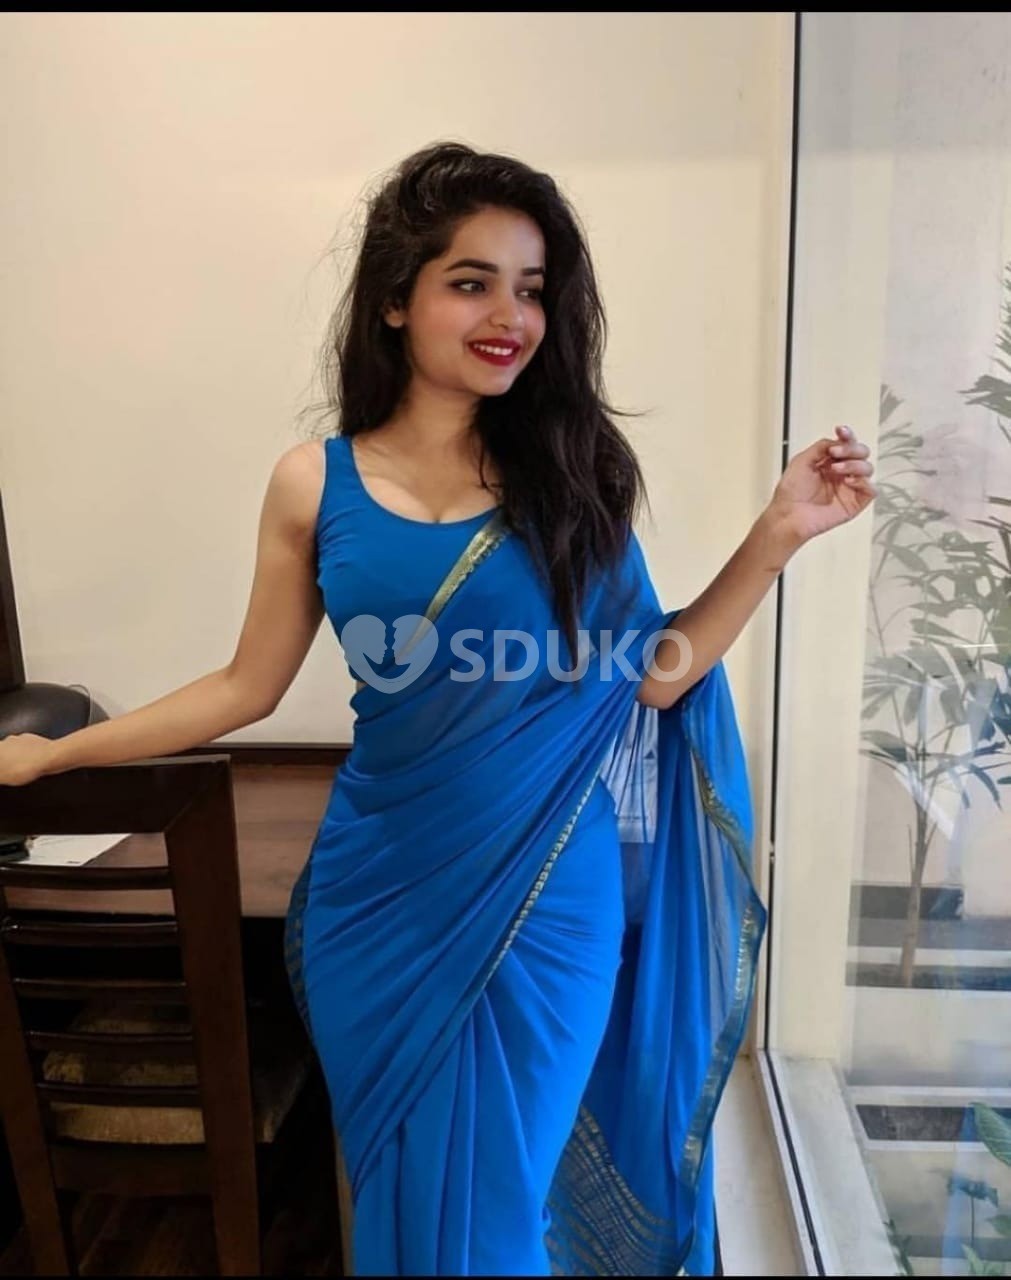 Kannur....🌞...low price 🥰100% SAFE AND SECURE TODAY LOW PRICE UNLIMITED ENJOY HOT COLLEGE GIRL HOUSEWIFE AUNTIES A